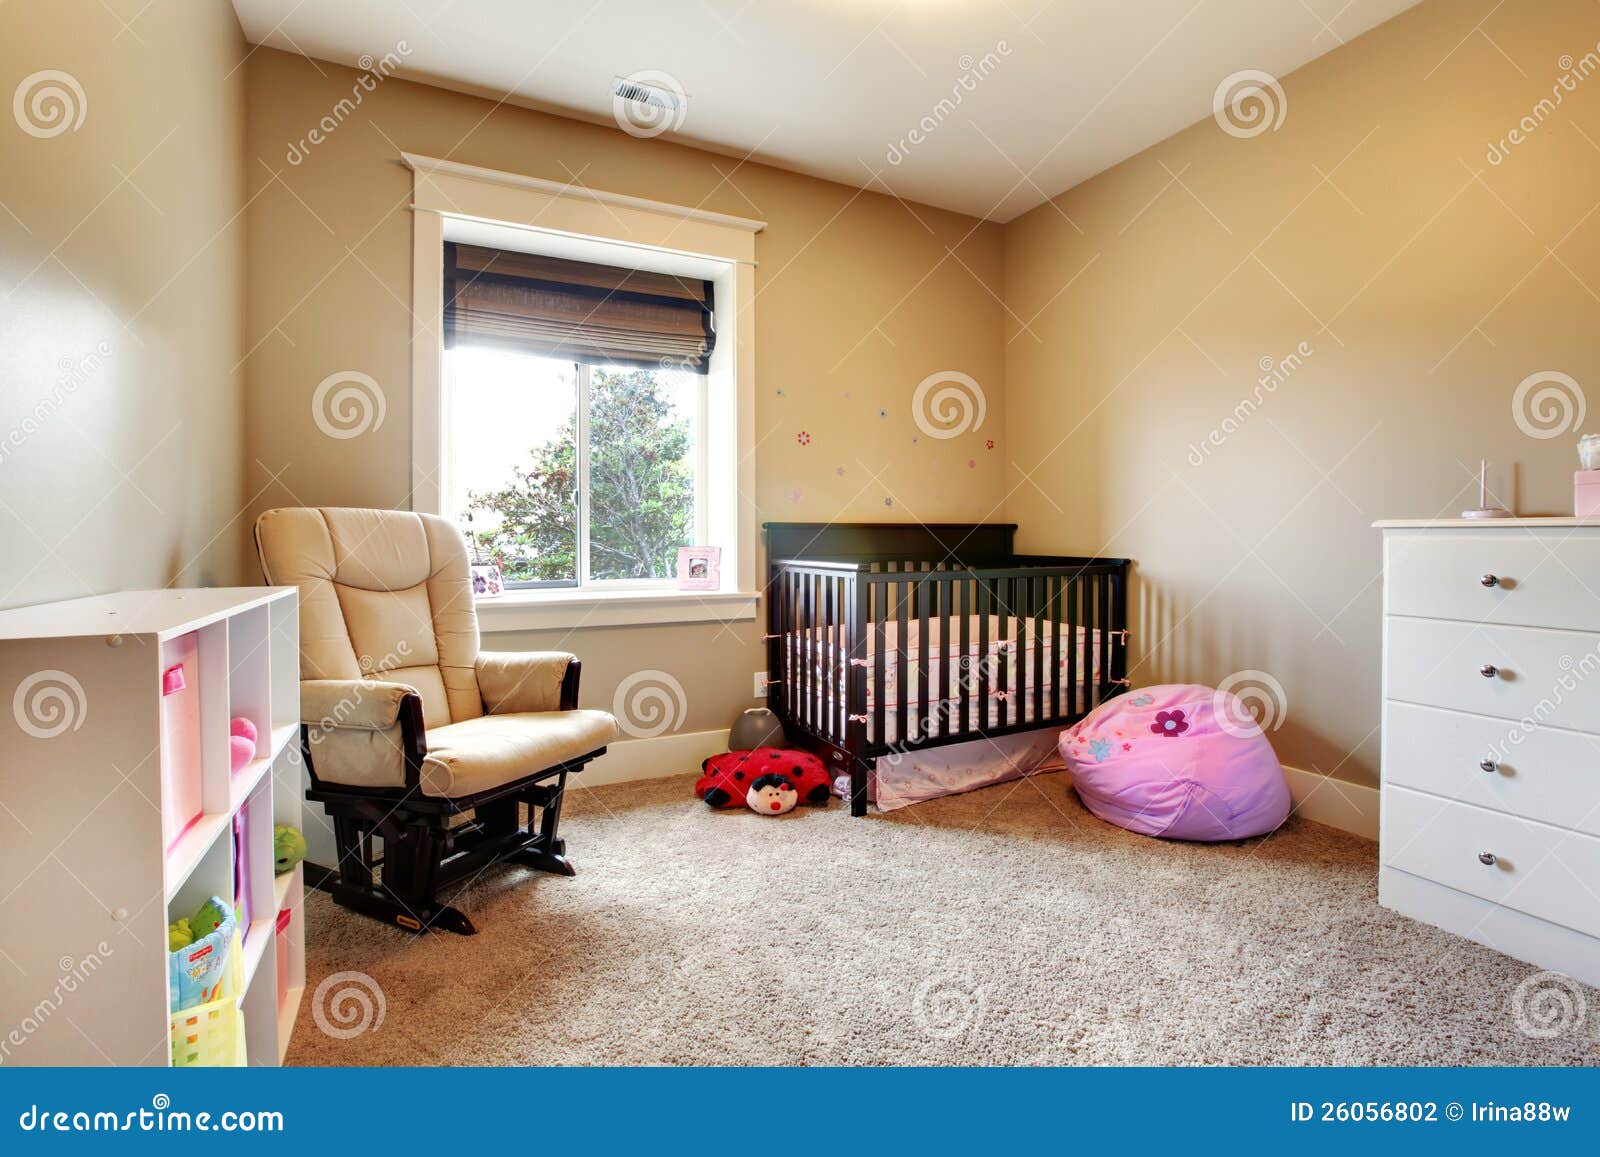 Stock Photography: Nursing room for baby girl with brown wood crib.